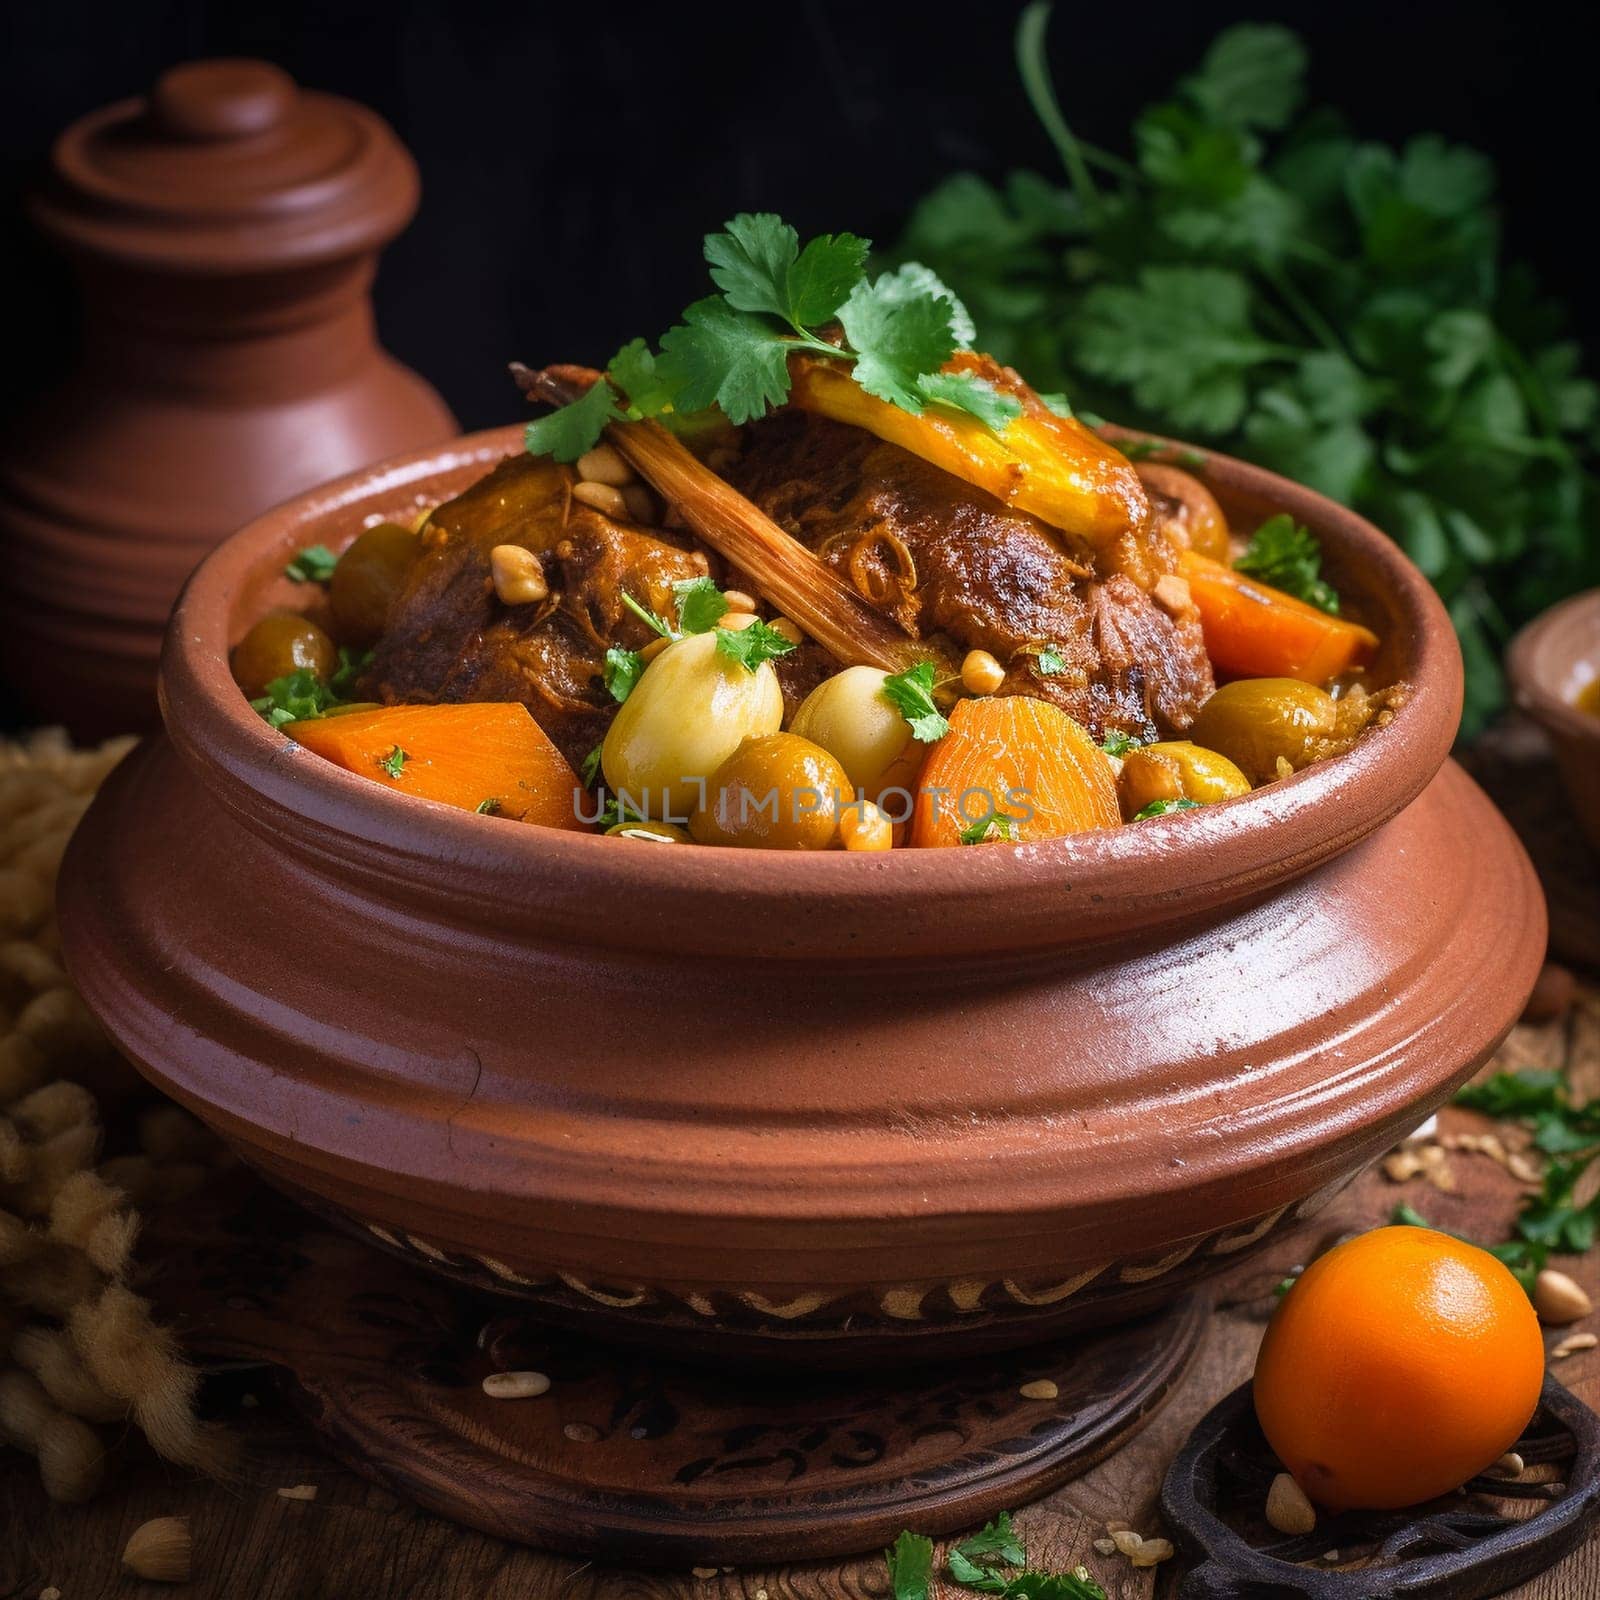 Capture the essence of Moroccan cuisine with this close-up shot of Tagine, a fragrant and flavorful slow-cooked stew. The tender pieces of meat, usually chicken or lamb, are slow-cooked with fragrant spices like cinnamon, saffron, and ginger, and vegetables like onions, carrots, and tomatoes. The tagine is served with a side of fluffy couscous and garnished with fresh herbs and preserved lemons, perfect for a cozy and comforting mood. The warm, diffused lighting and dining room scene enhance the comforting atmosphere.